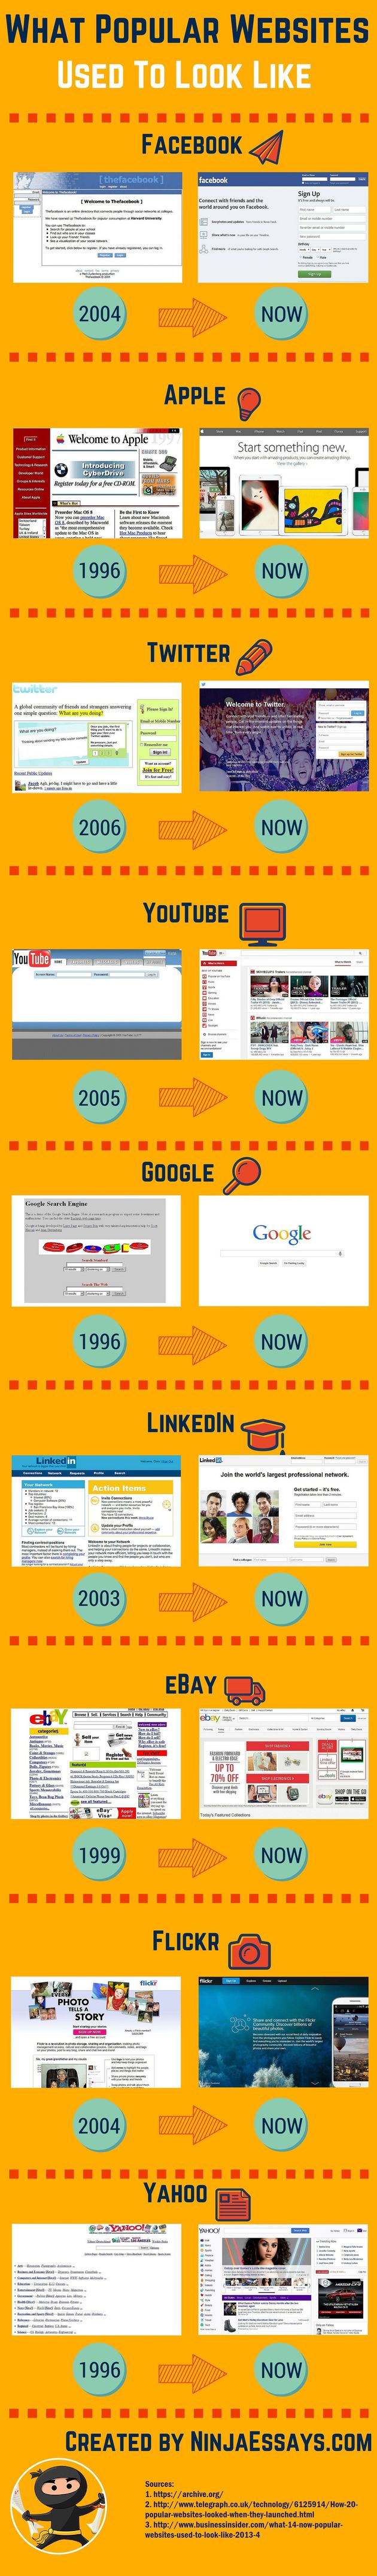 infographic populaire oude websites